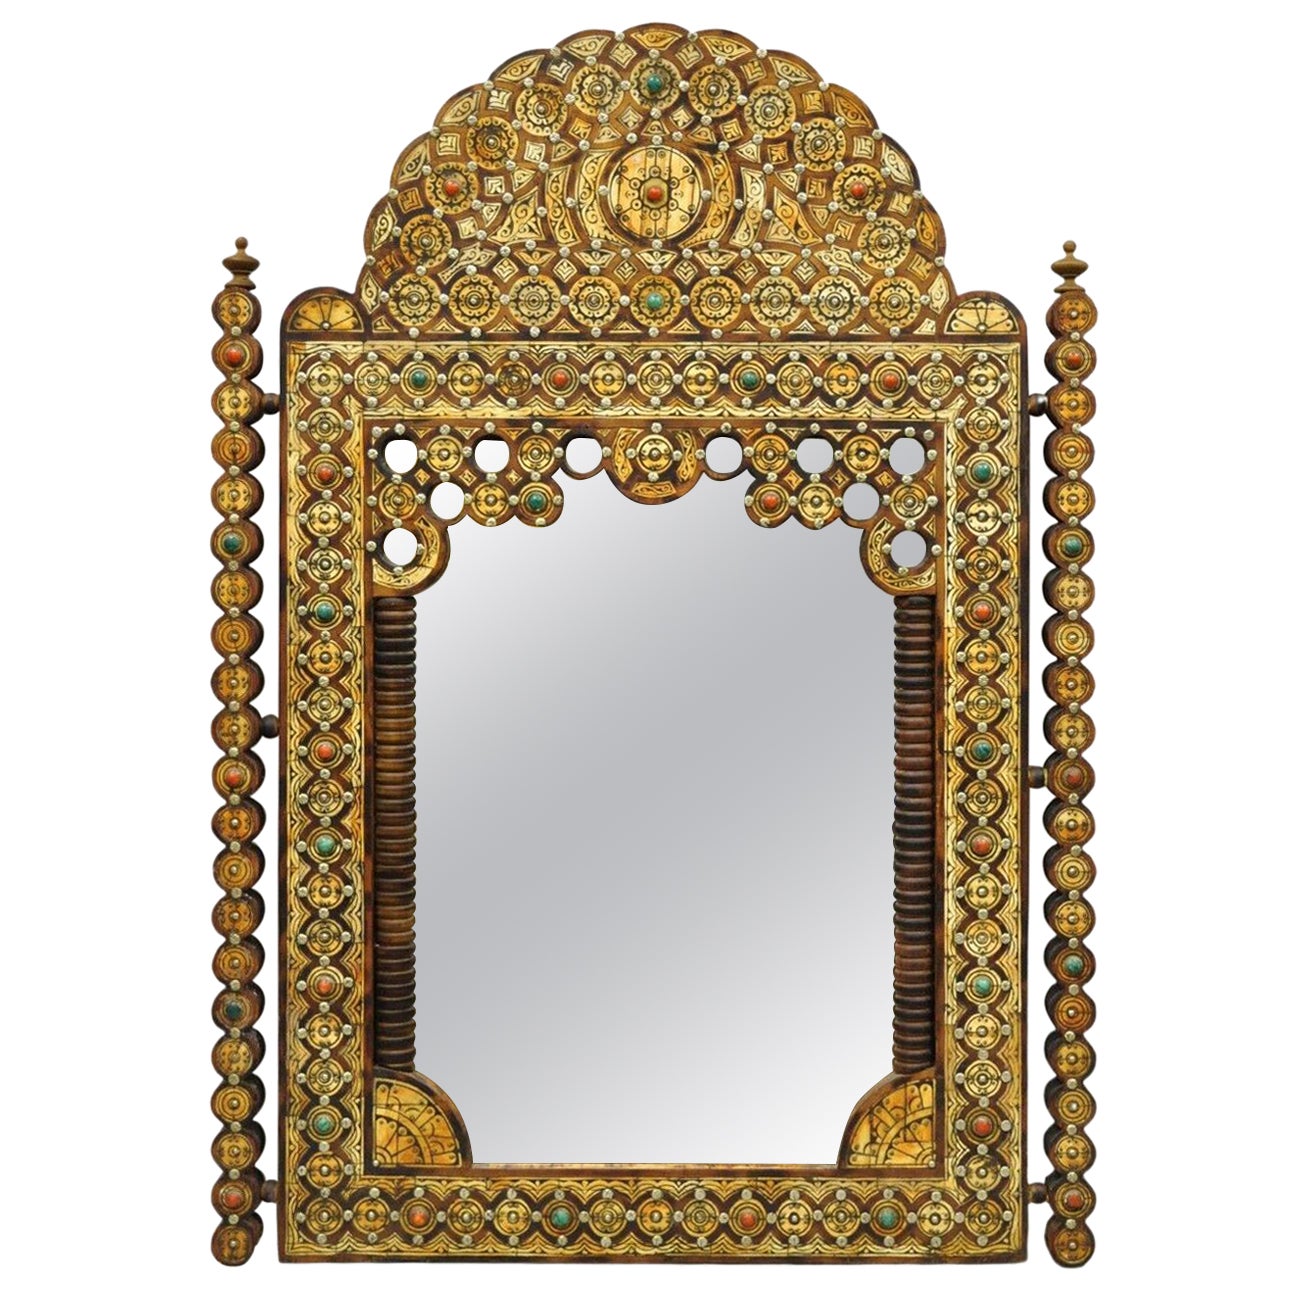 Vintage Moroccan Moorish Style Carved Wood Mirror with Jewel Accents